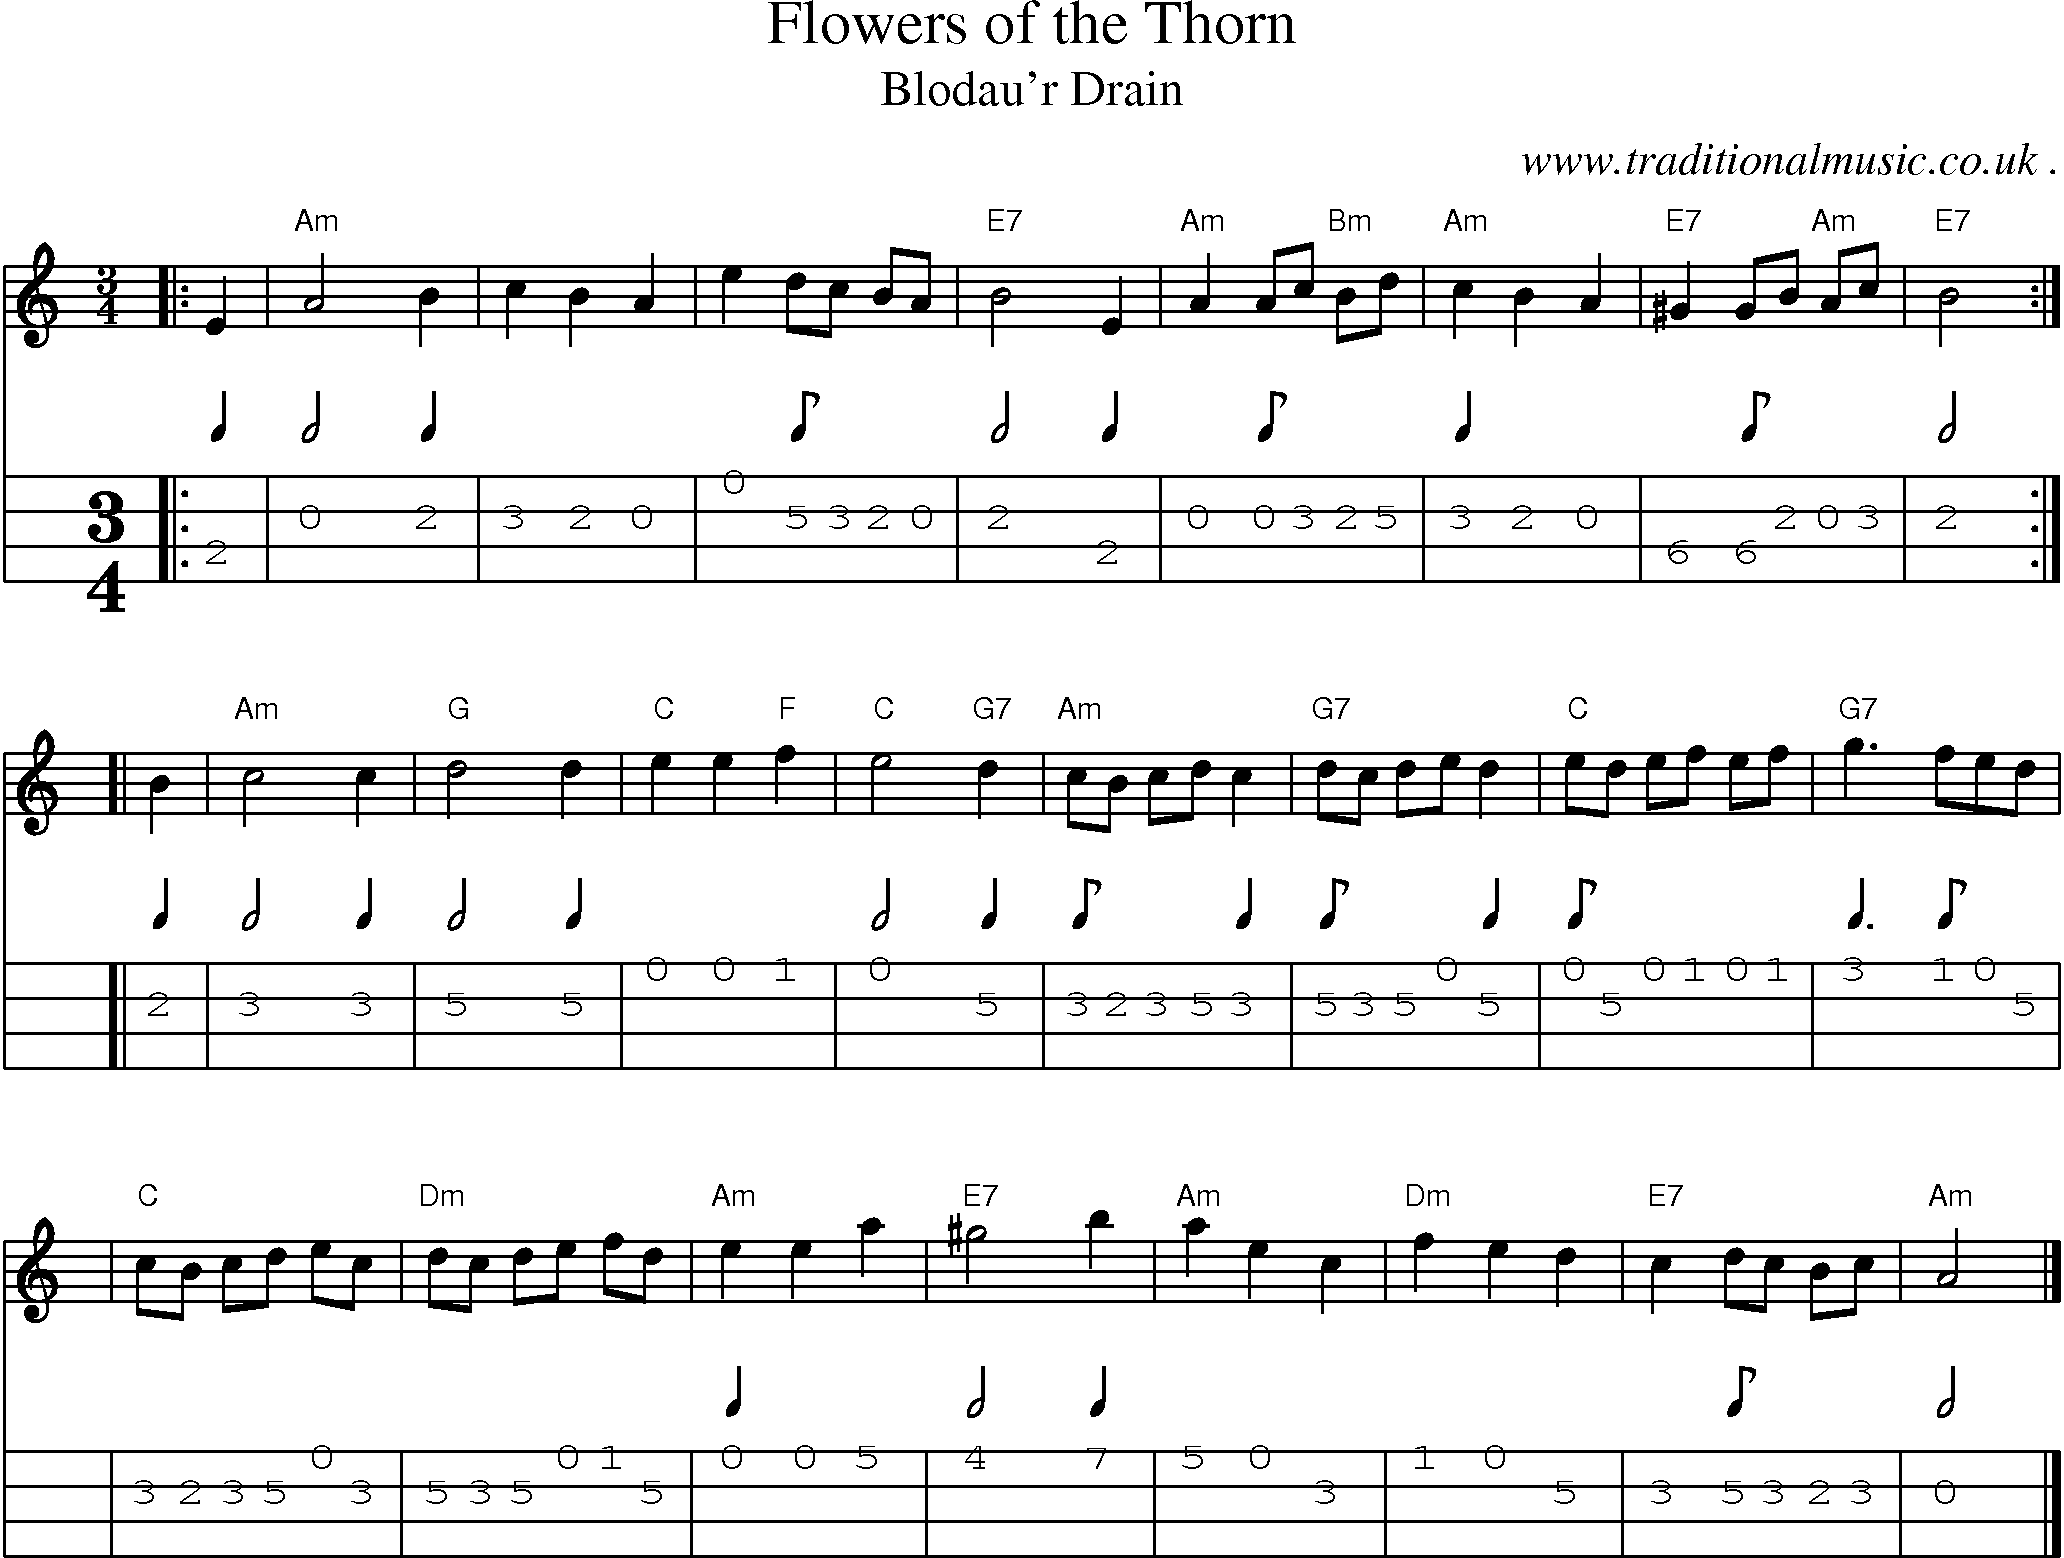 Sheet-music  score, Chords and Mandolin Tabs for Flowers Of The Thorn